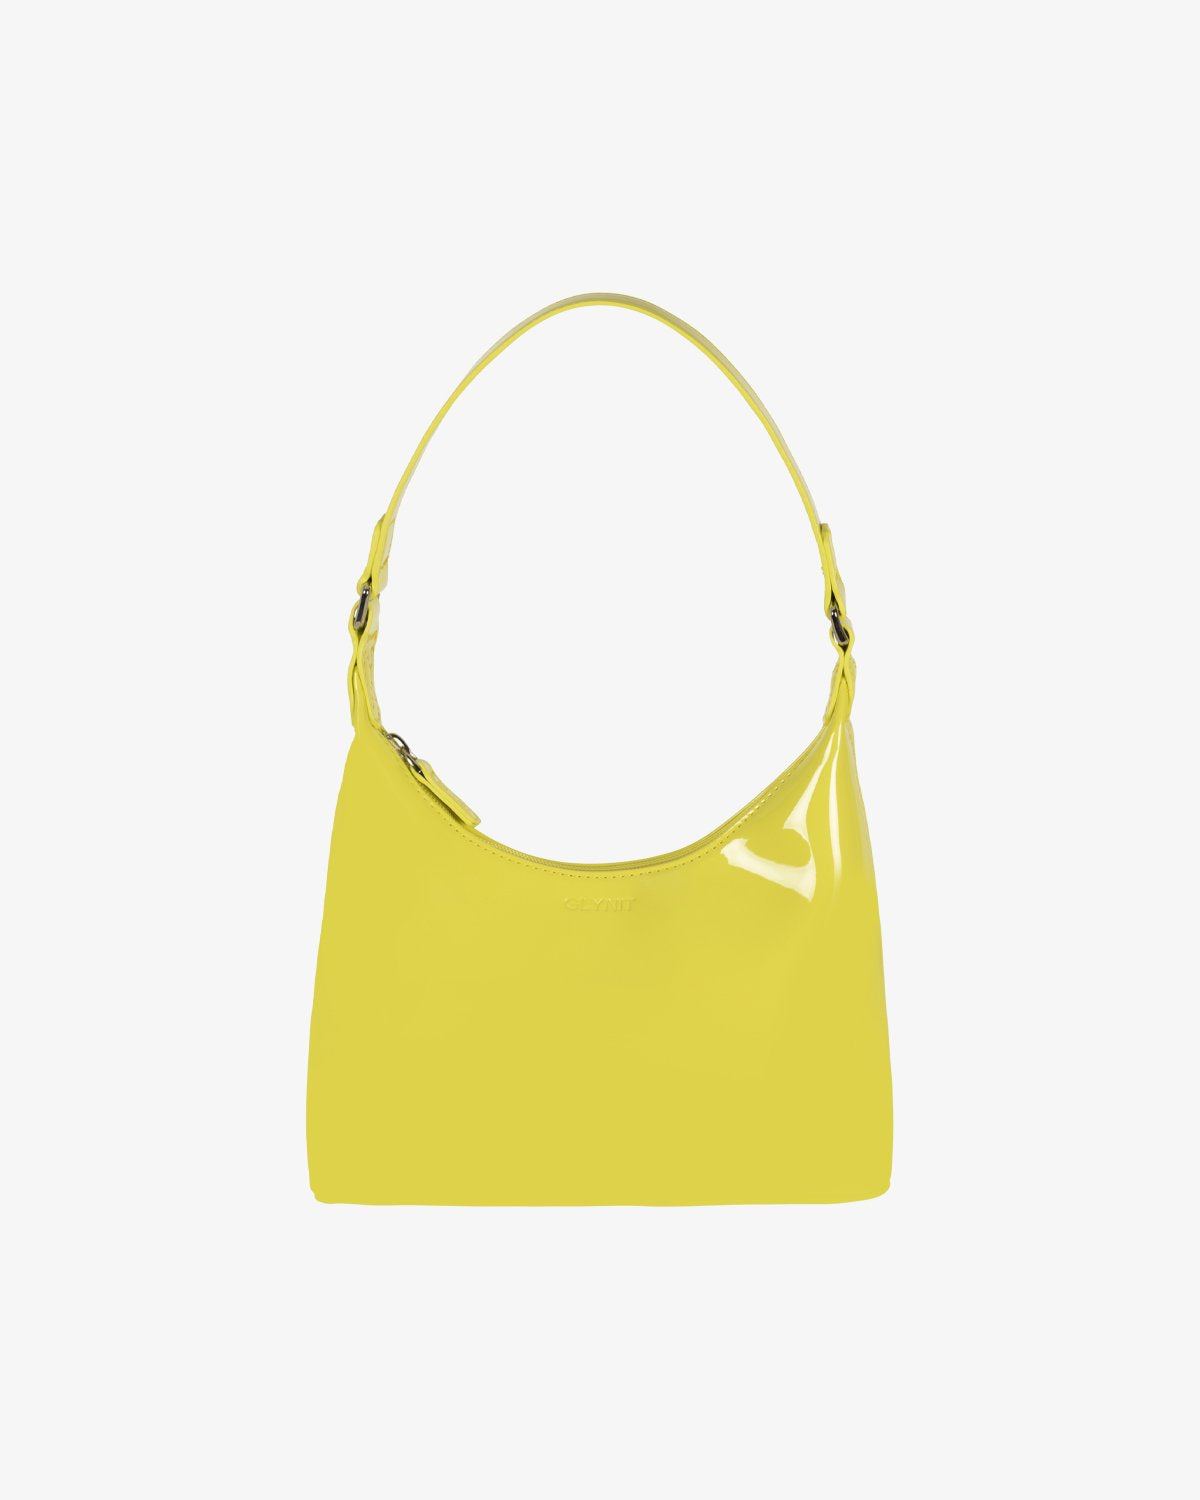 THE MOLLY BAG - LIME YELLOW - EXCLUSIVE Bags from GLYNIT - Just $69.00! SHOP NOW AT IAMINHATELOVE BOTH IN STORE FOR CYPRUS AND ONLINE WORLDWIDE